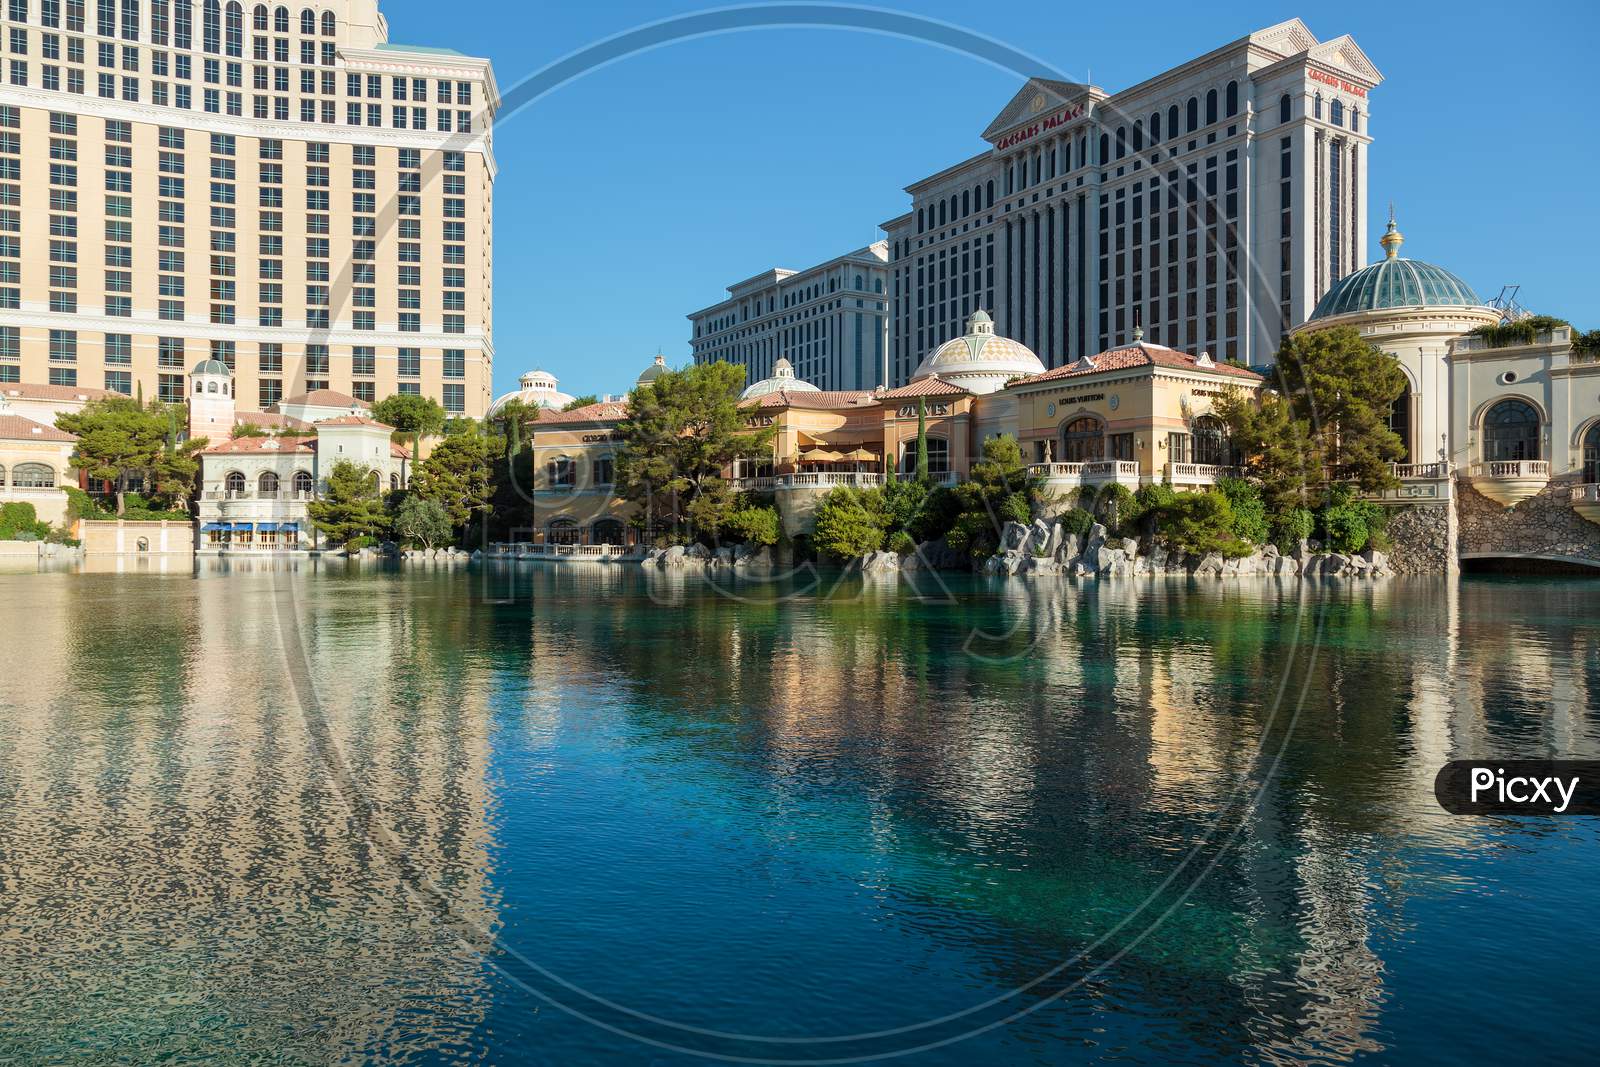 LAS VEGAS, NEVADA, USA, 2011. View of the Bellagio Hotel and